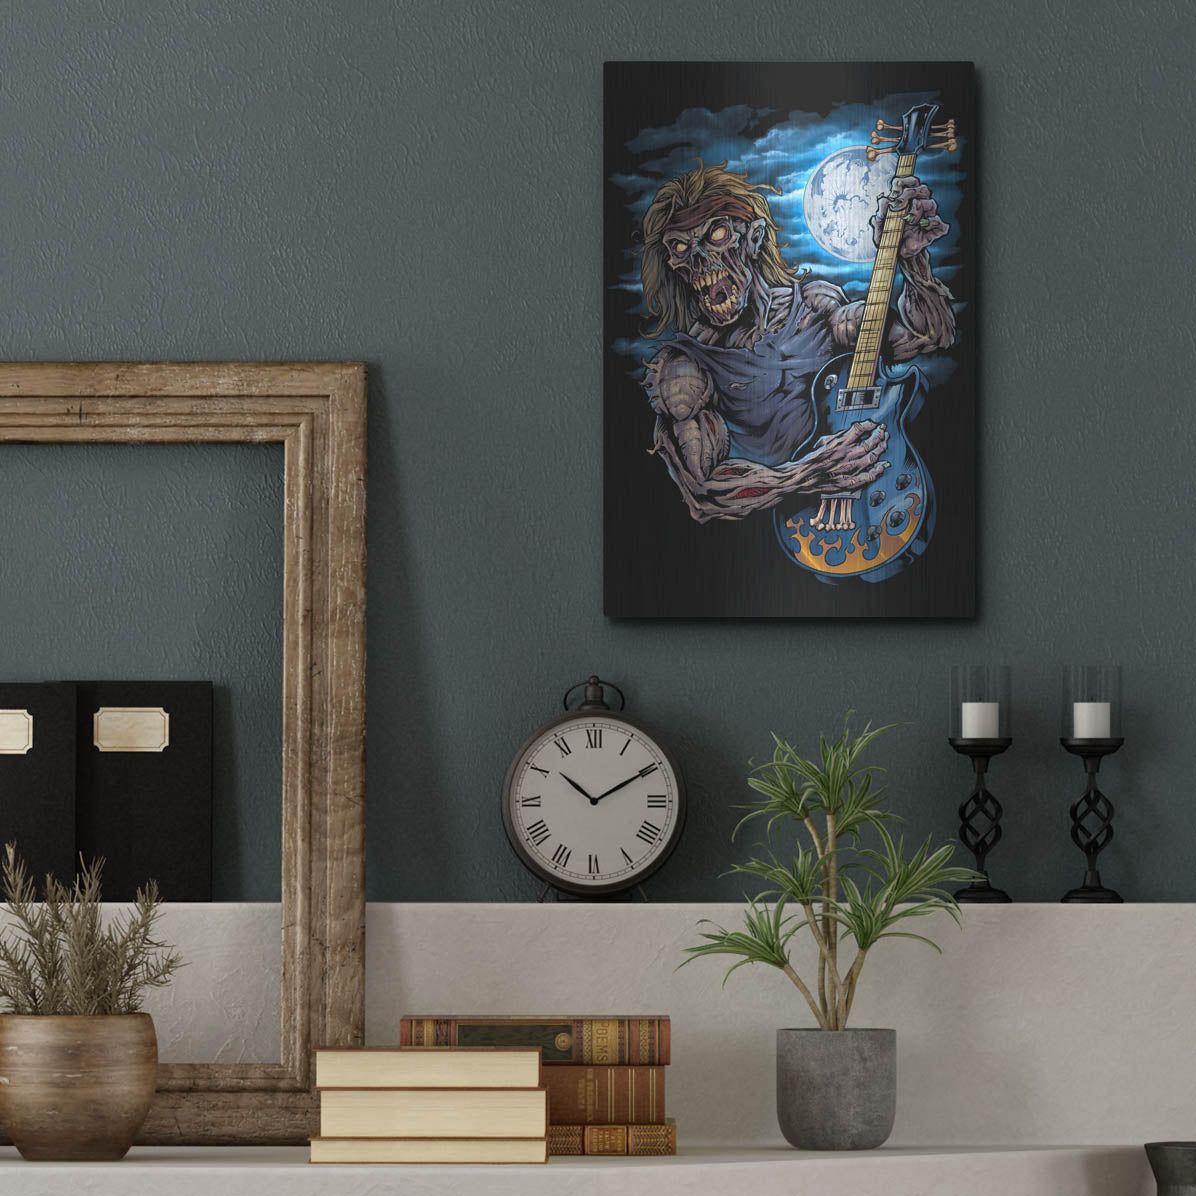 Luxe Metal Art 'Zombie Guitar Player' by Flyland Designs, Metal Wall Art,12x16